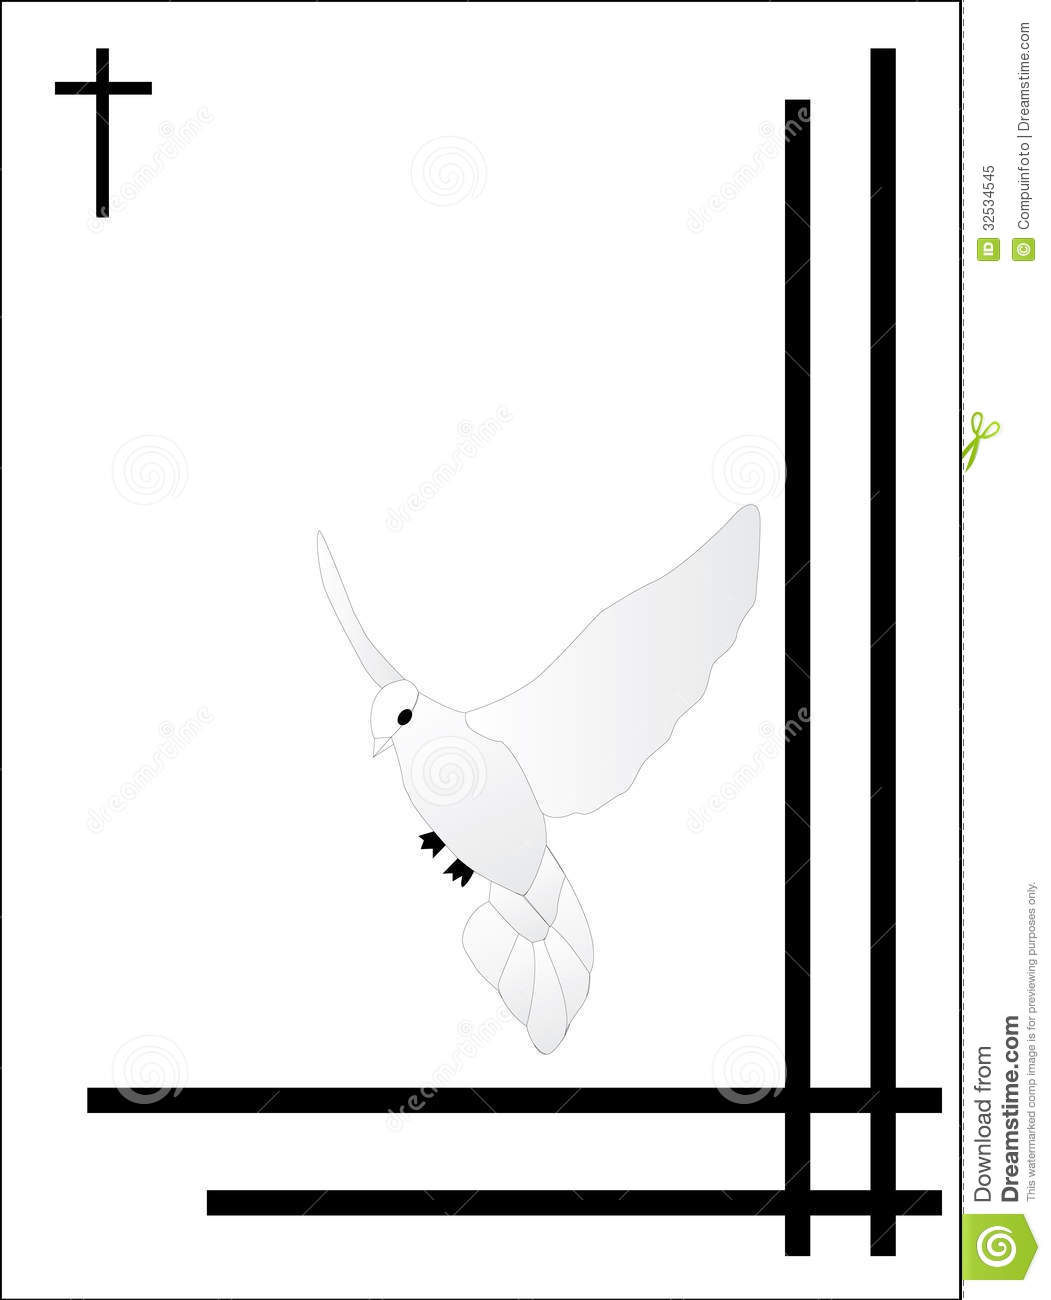 For Funeral Dove Clipart Displaying 19 Images For Funeral Dove Clipart